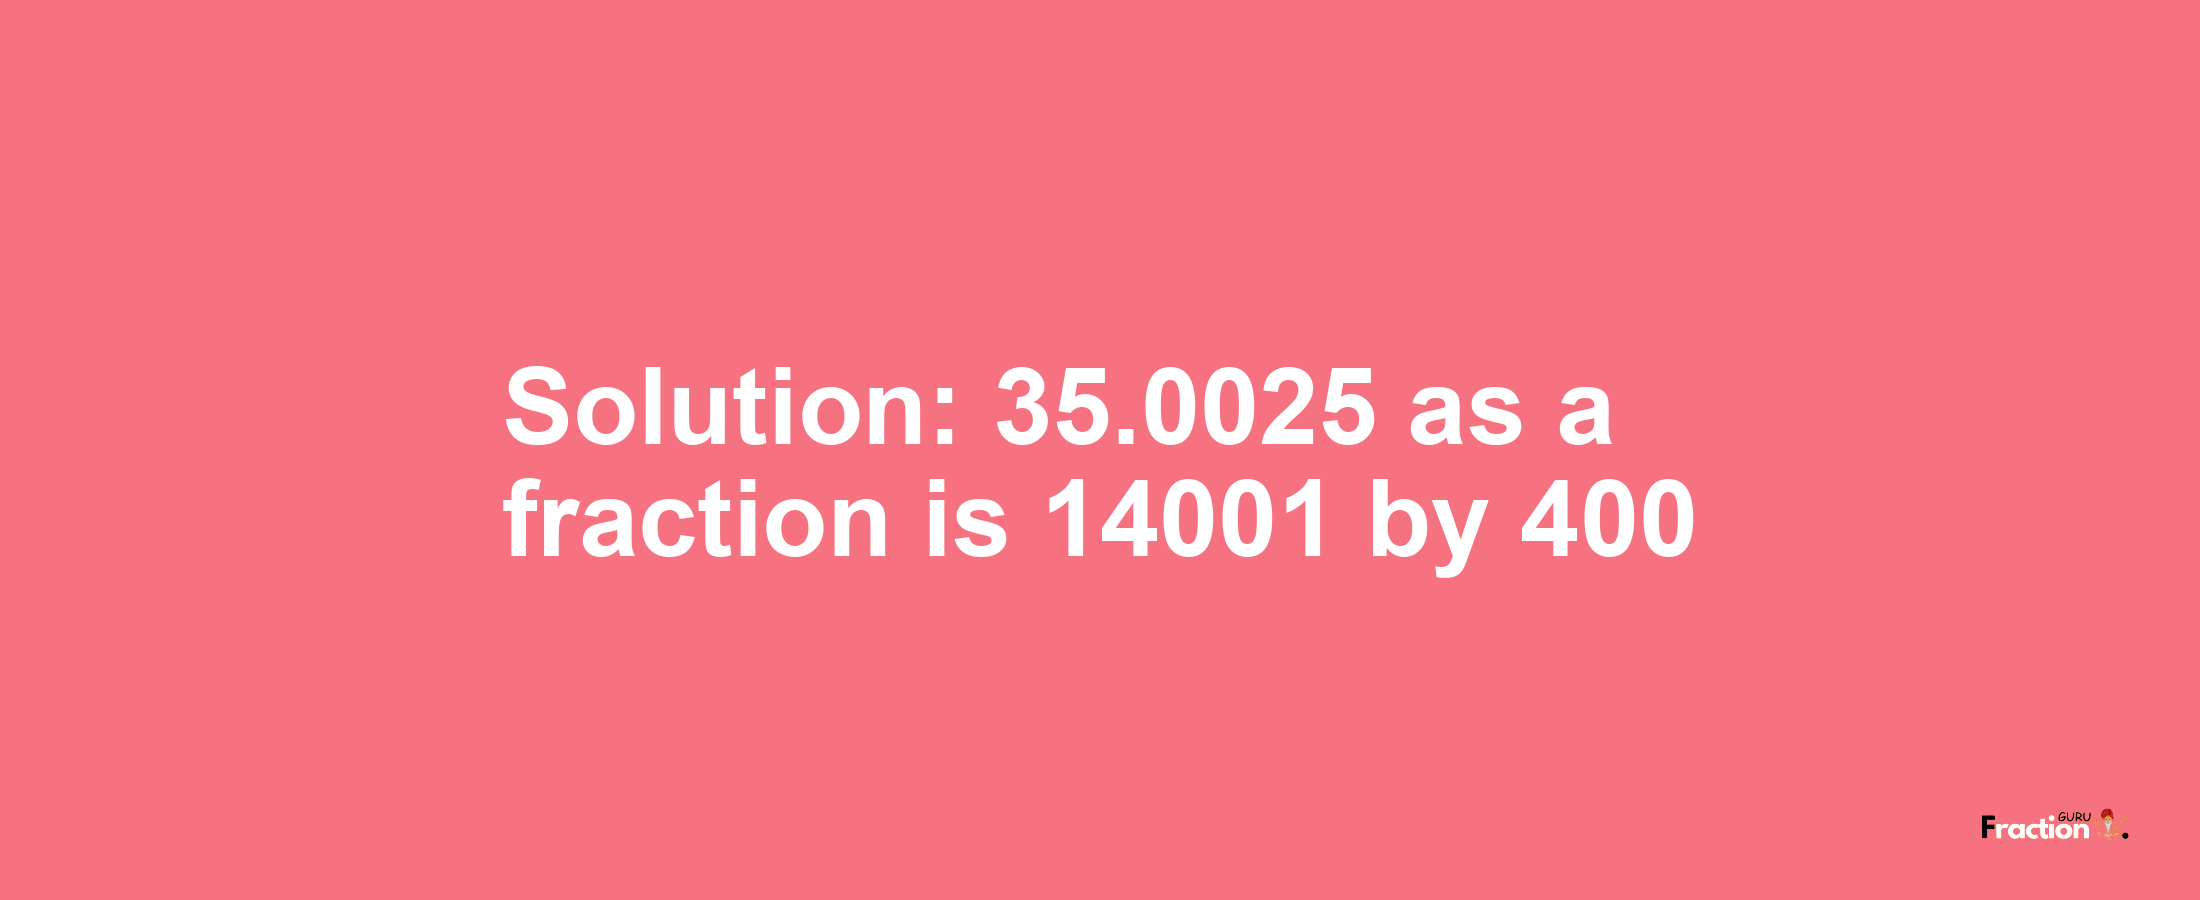 Solution:35.0025 as a fraction is 14001/400